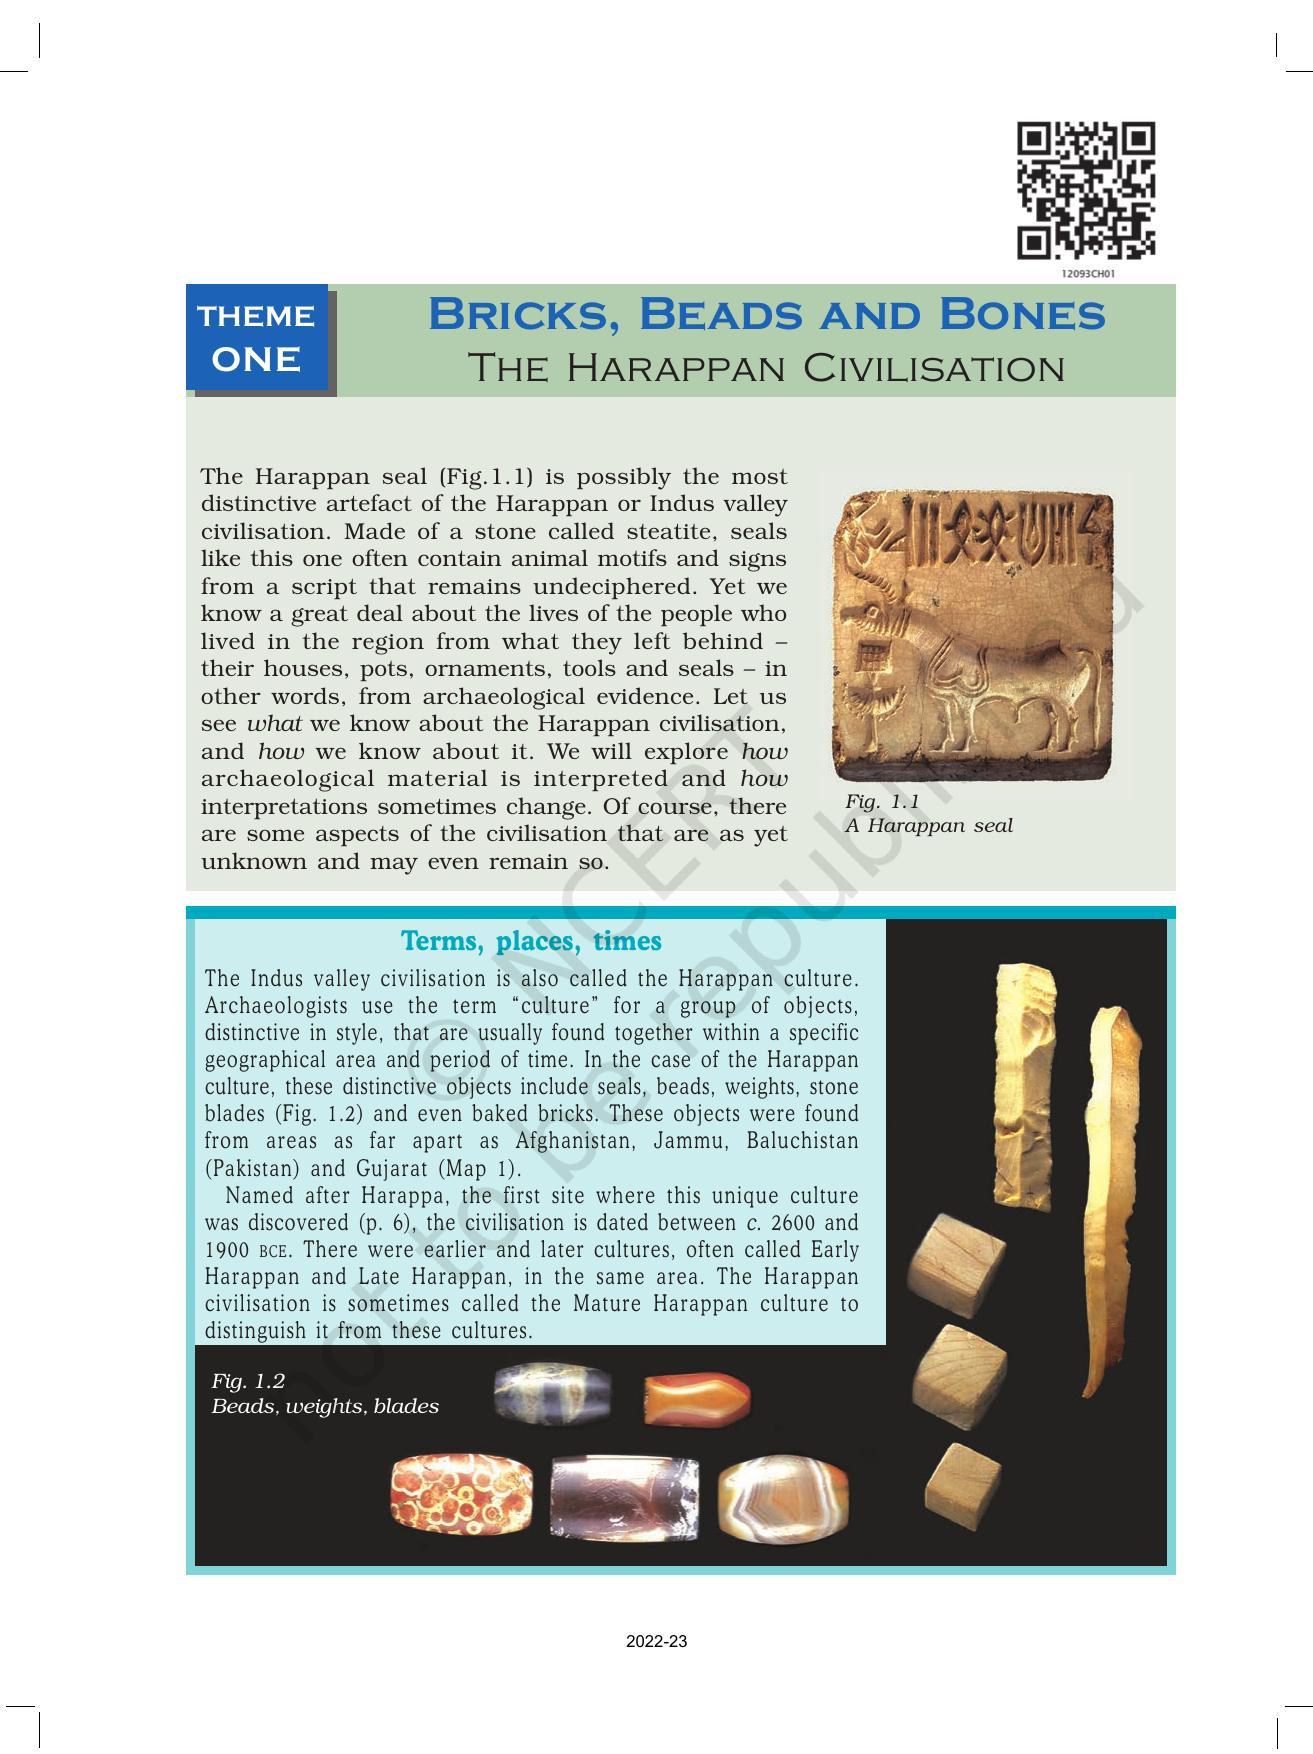 NCERT Book for Class 12 History (Part-1) Chapter 1 Bricks, Beads, and Bones - Page 1